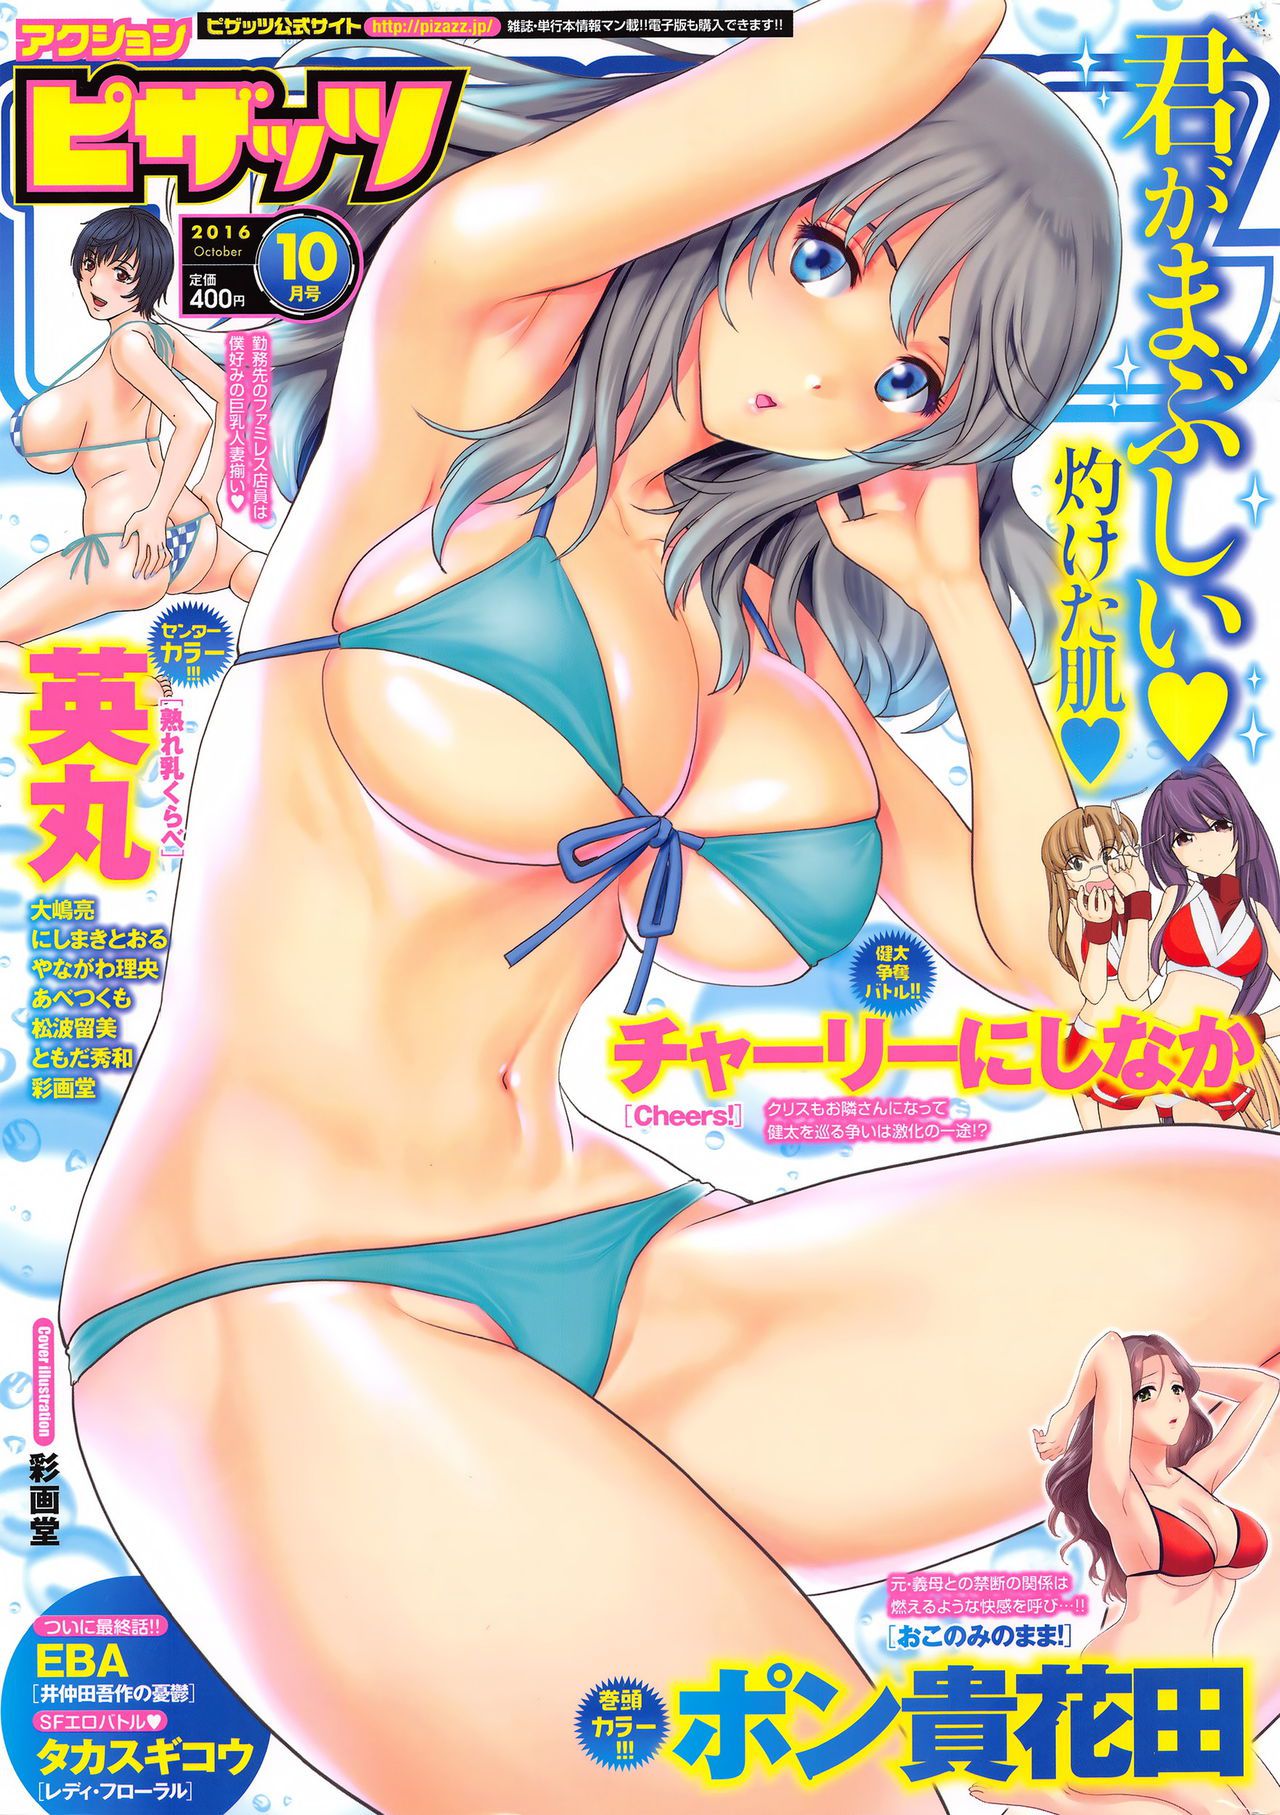 [Saigado] Cover Illustrations [彩画堂] Cover Illustrations 94